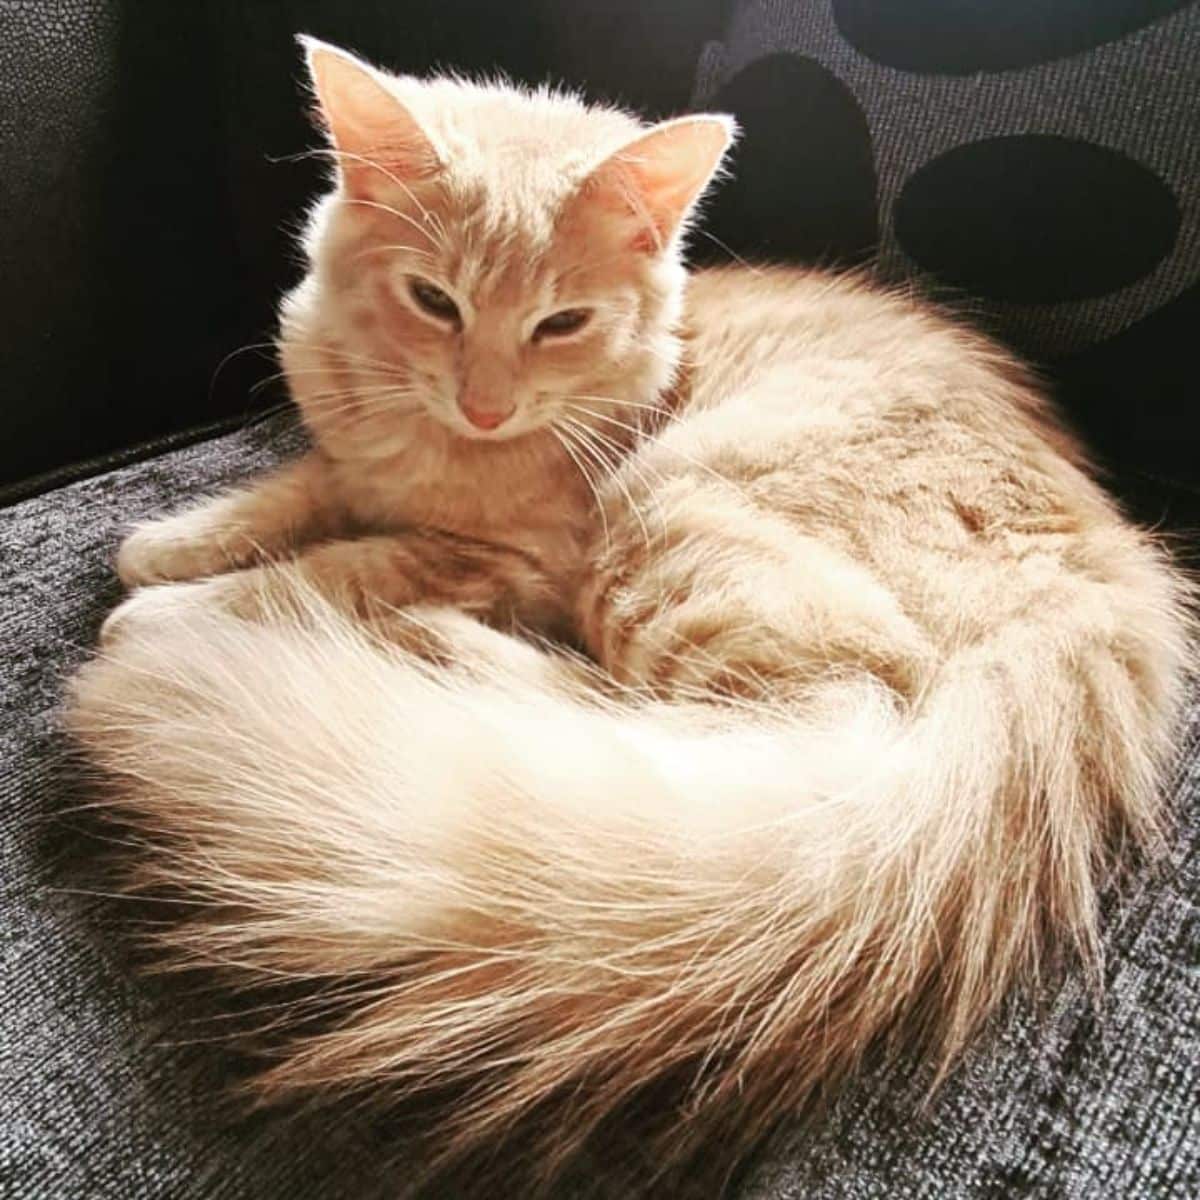 A beautiful fluffy maine coon kitten sitting on a couch.